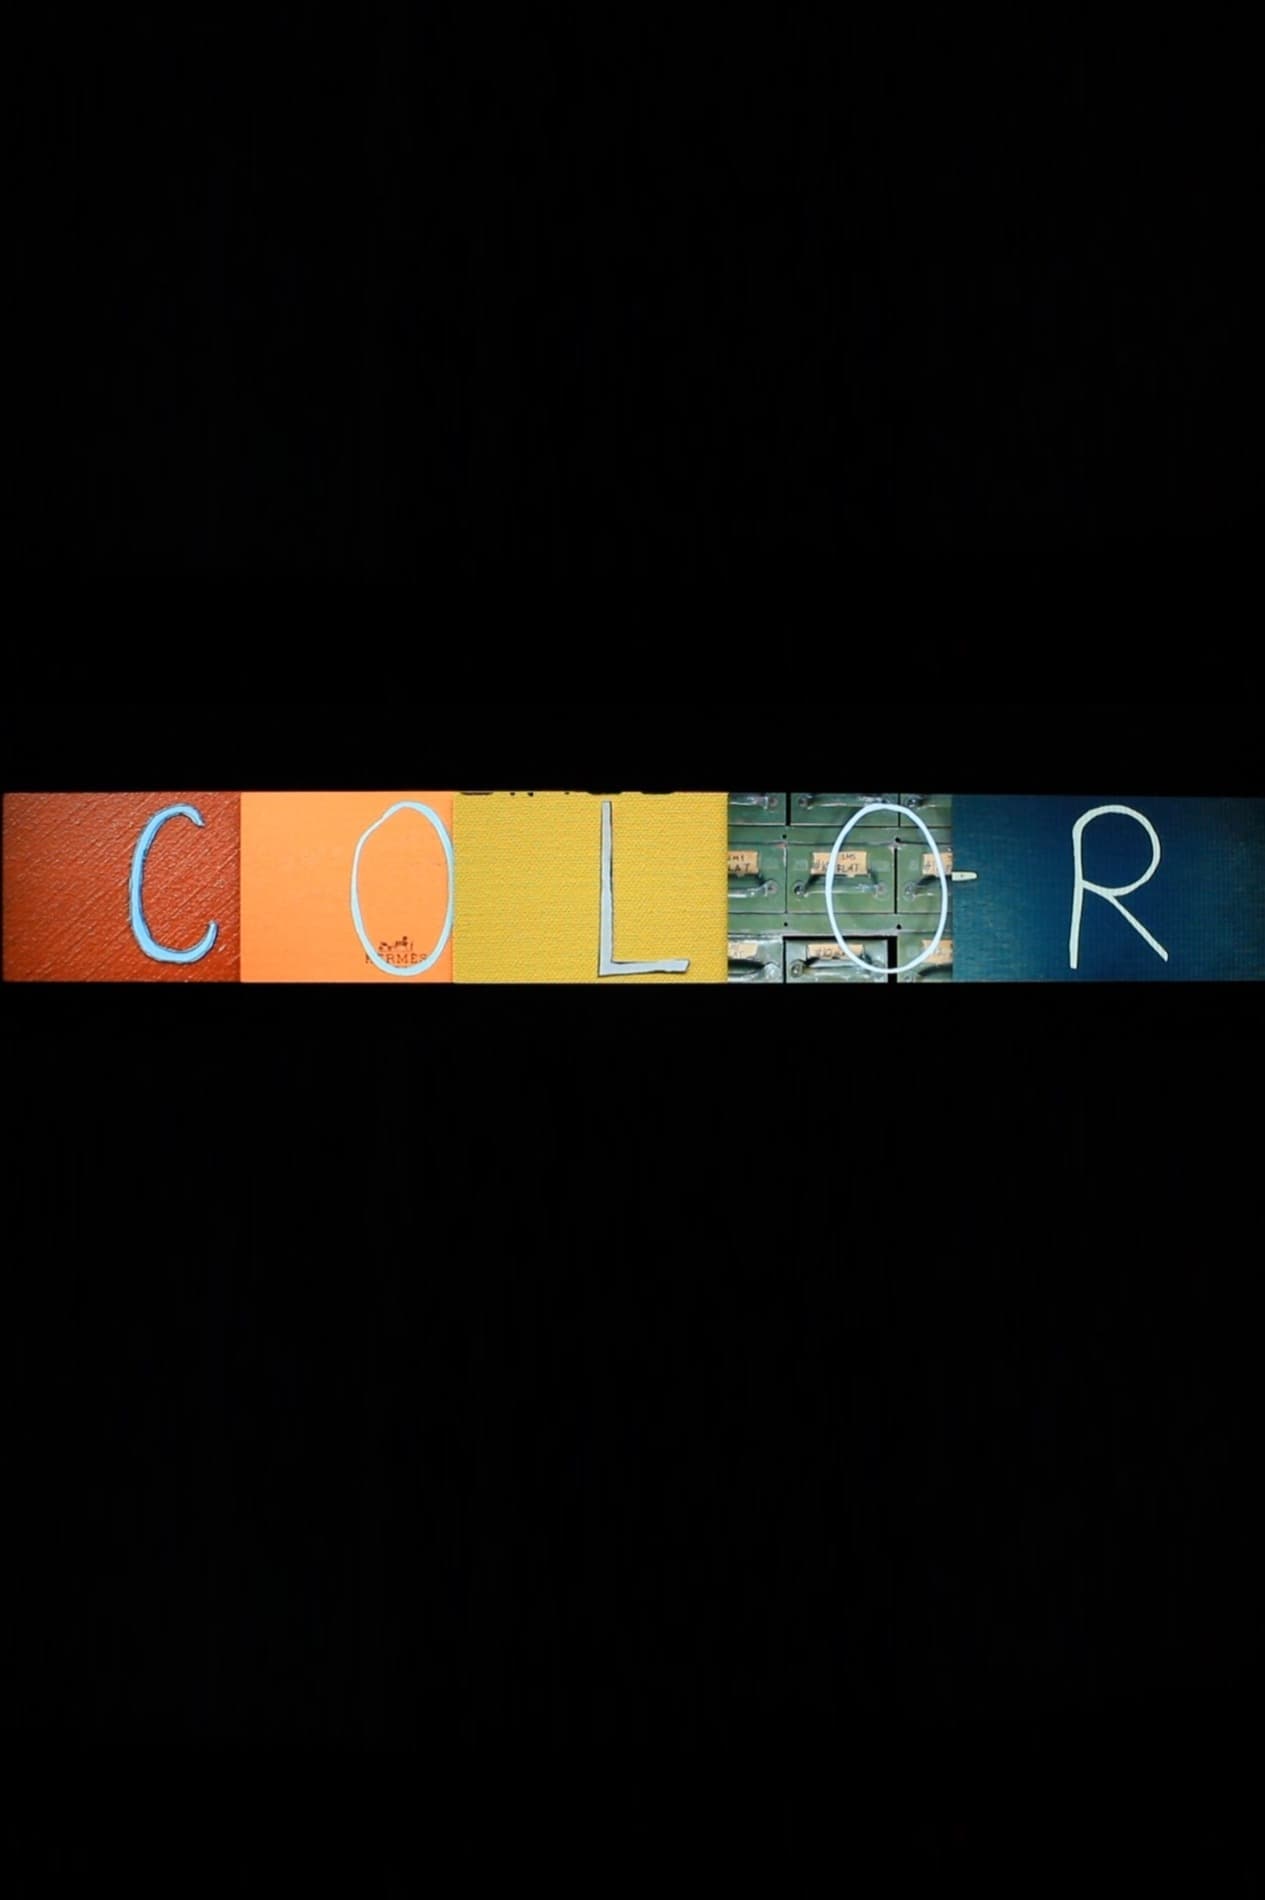 COLOR. by Tom Sachs